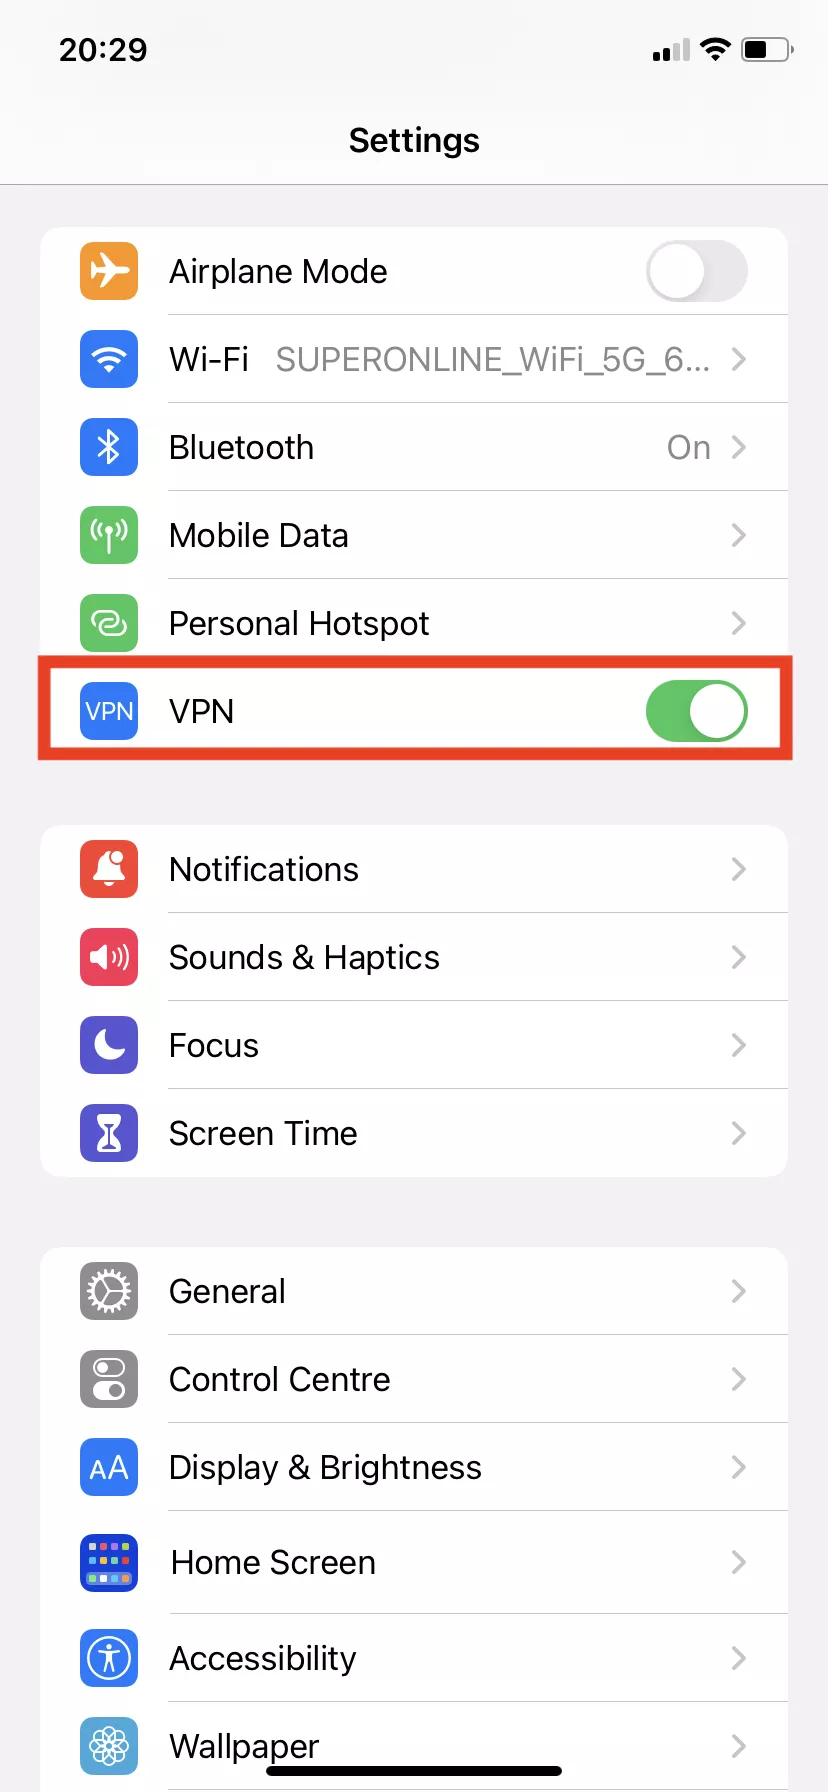 How to install VPN on iOS?